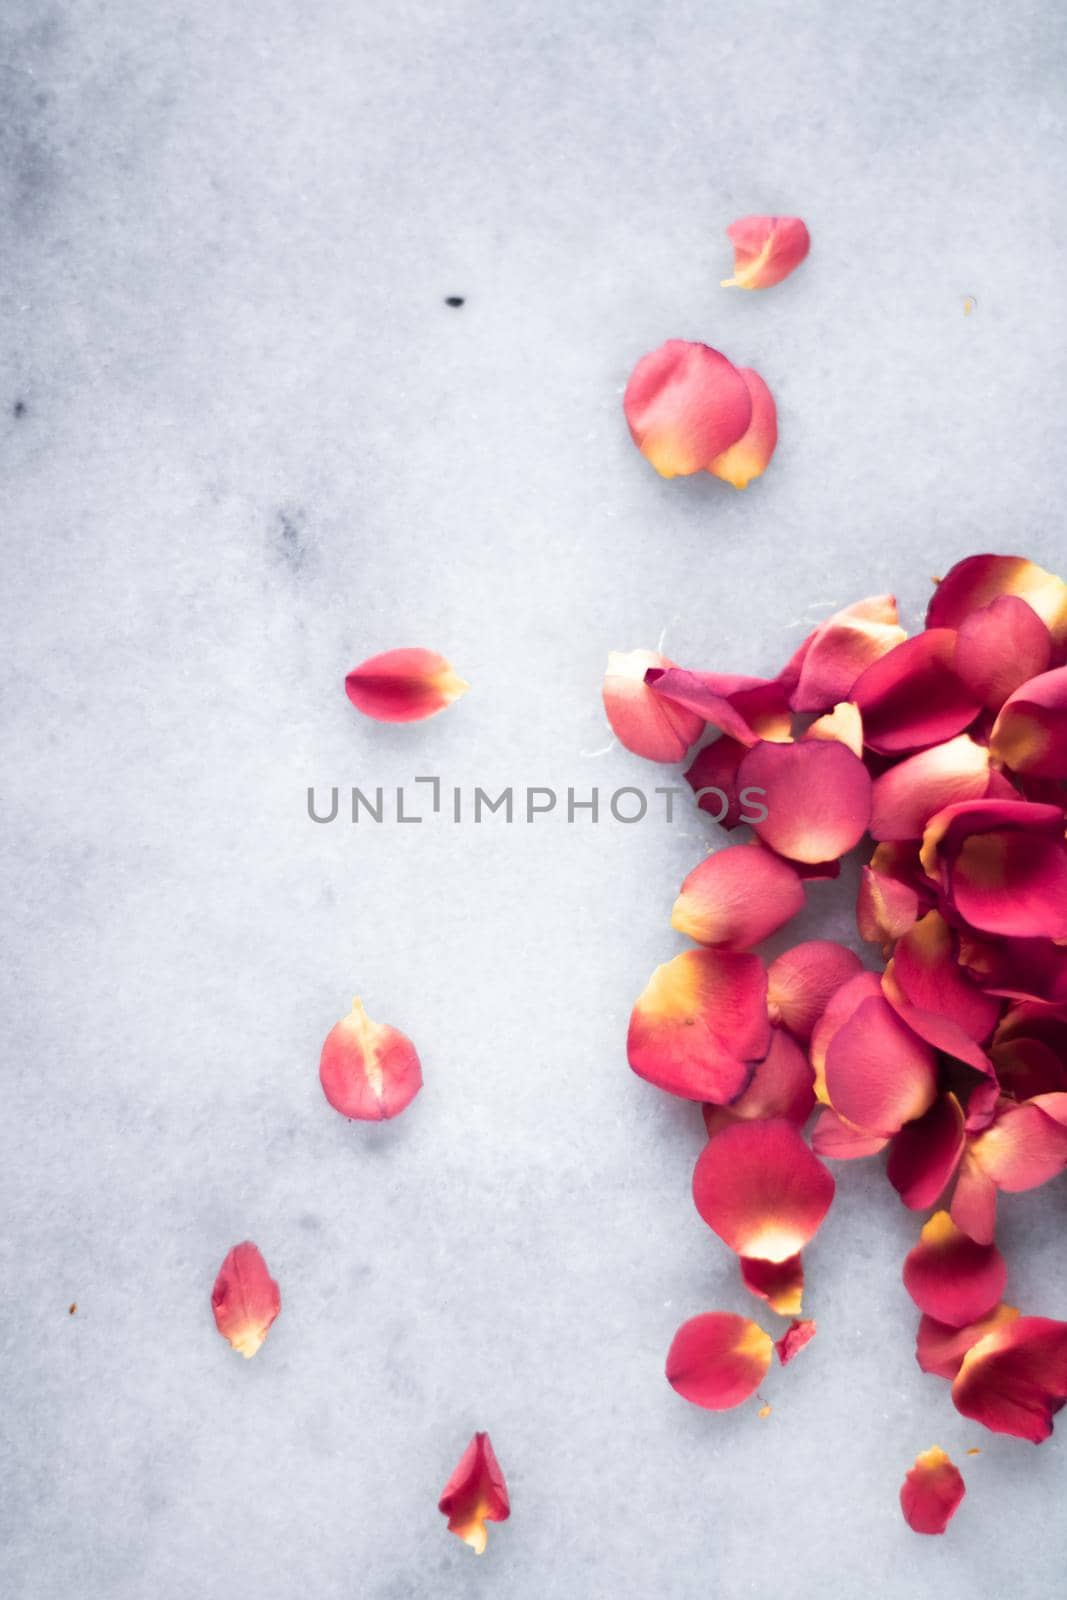 rose petals on marble flatlay - wedding, holiday and floral background styled concept by Anneleven